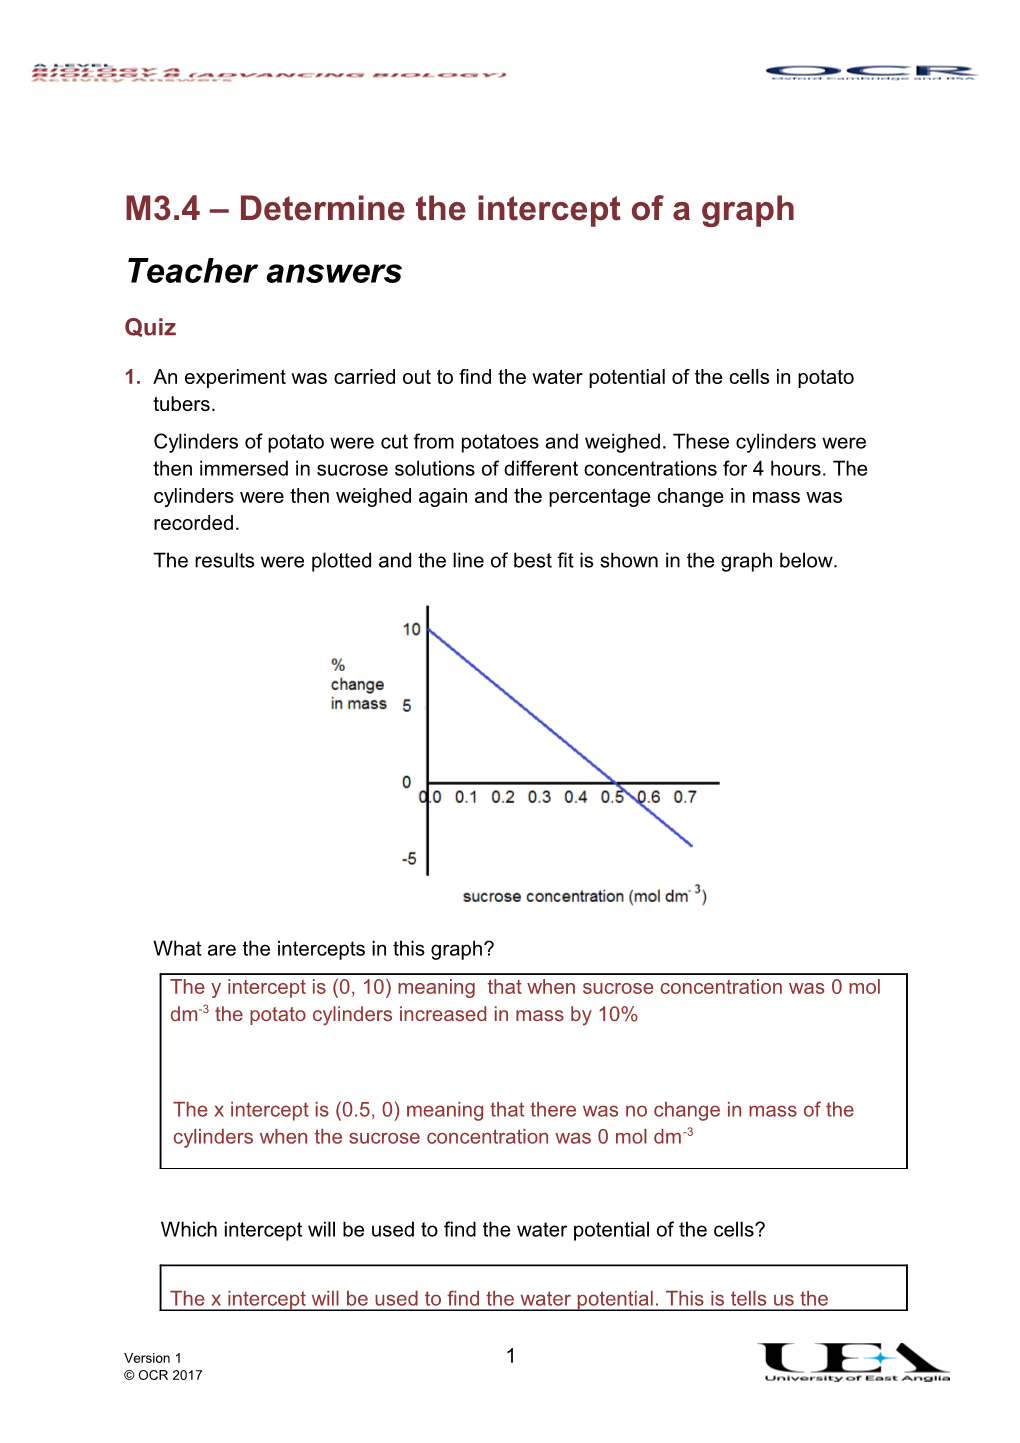 Maths in Biology M3.4 Quiz Answers